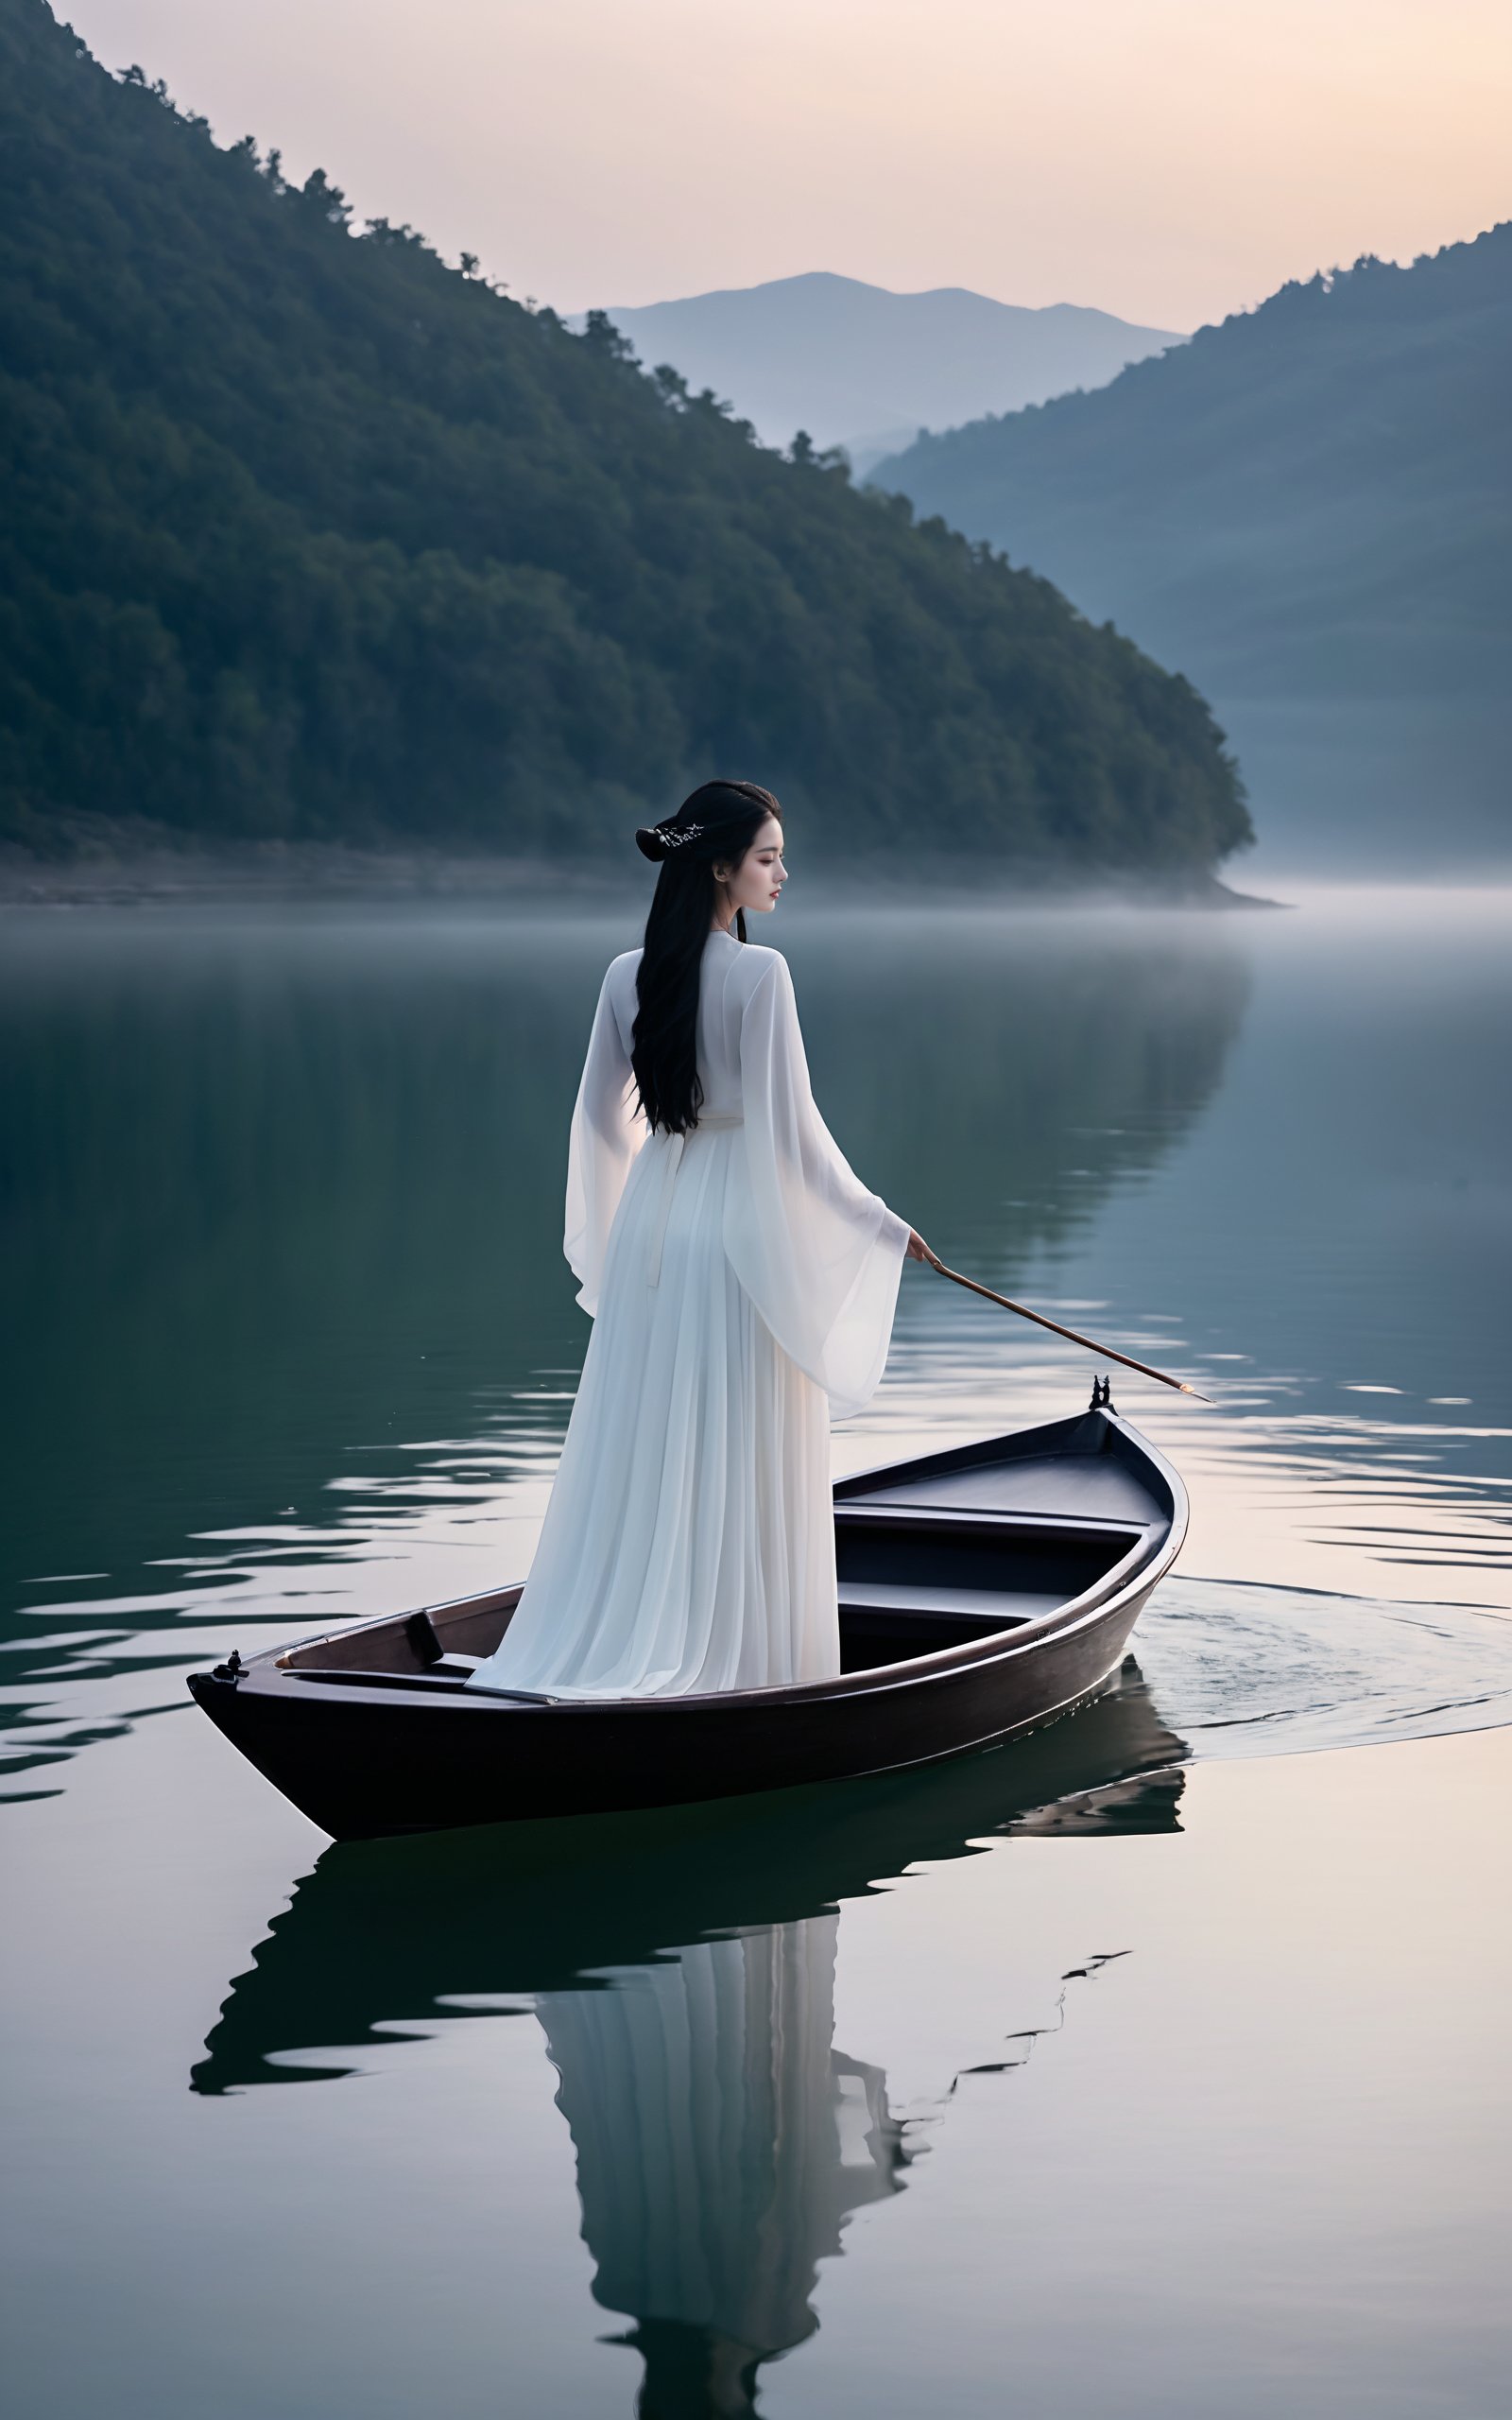 A serene scene unfolds as a lone girl stands on a sleek watercraft in the midst of a tranquil lake,her long,raven-black hair gently swaying in the breeze. She wears a flowing white robe that cascades down her form like a cloud,its edges dancing with the wind. The watercraft glides silently through the misty veil surrounding her,the mirrored water reflecting the ethereal glow of the scene. Smoke swirls around the boat,creating an otherworldly atmosphere that shrouds her in mystery.,good hands,anatomical hands,perfect hands,